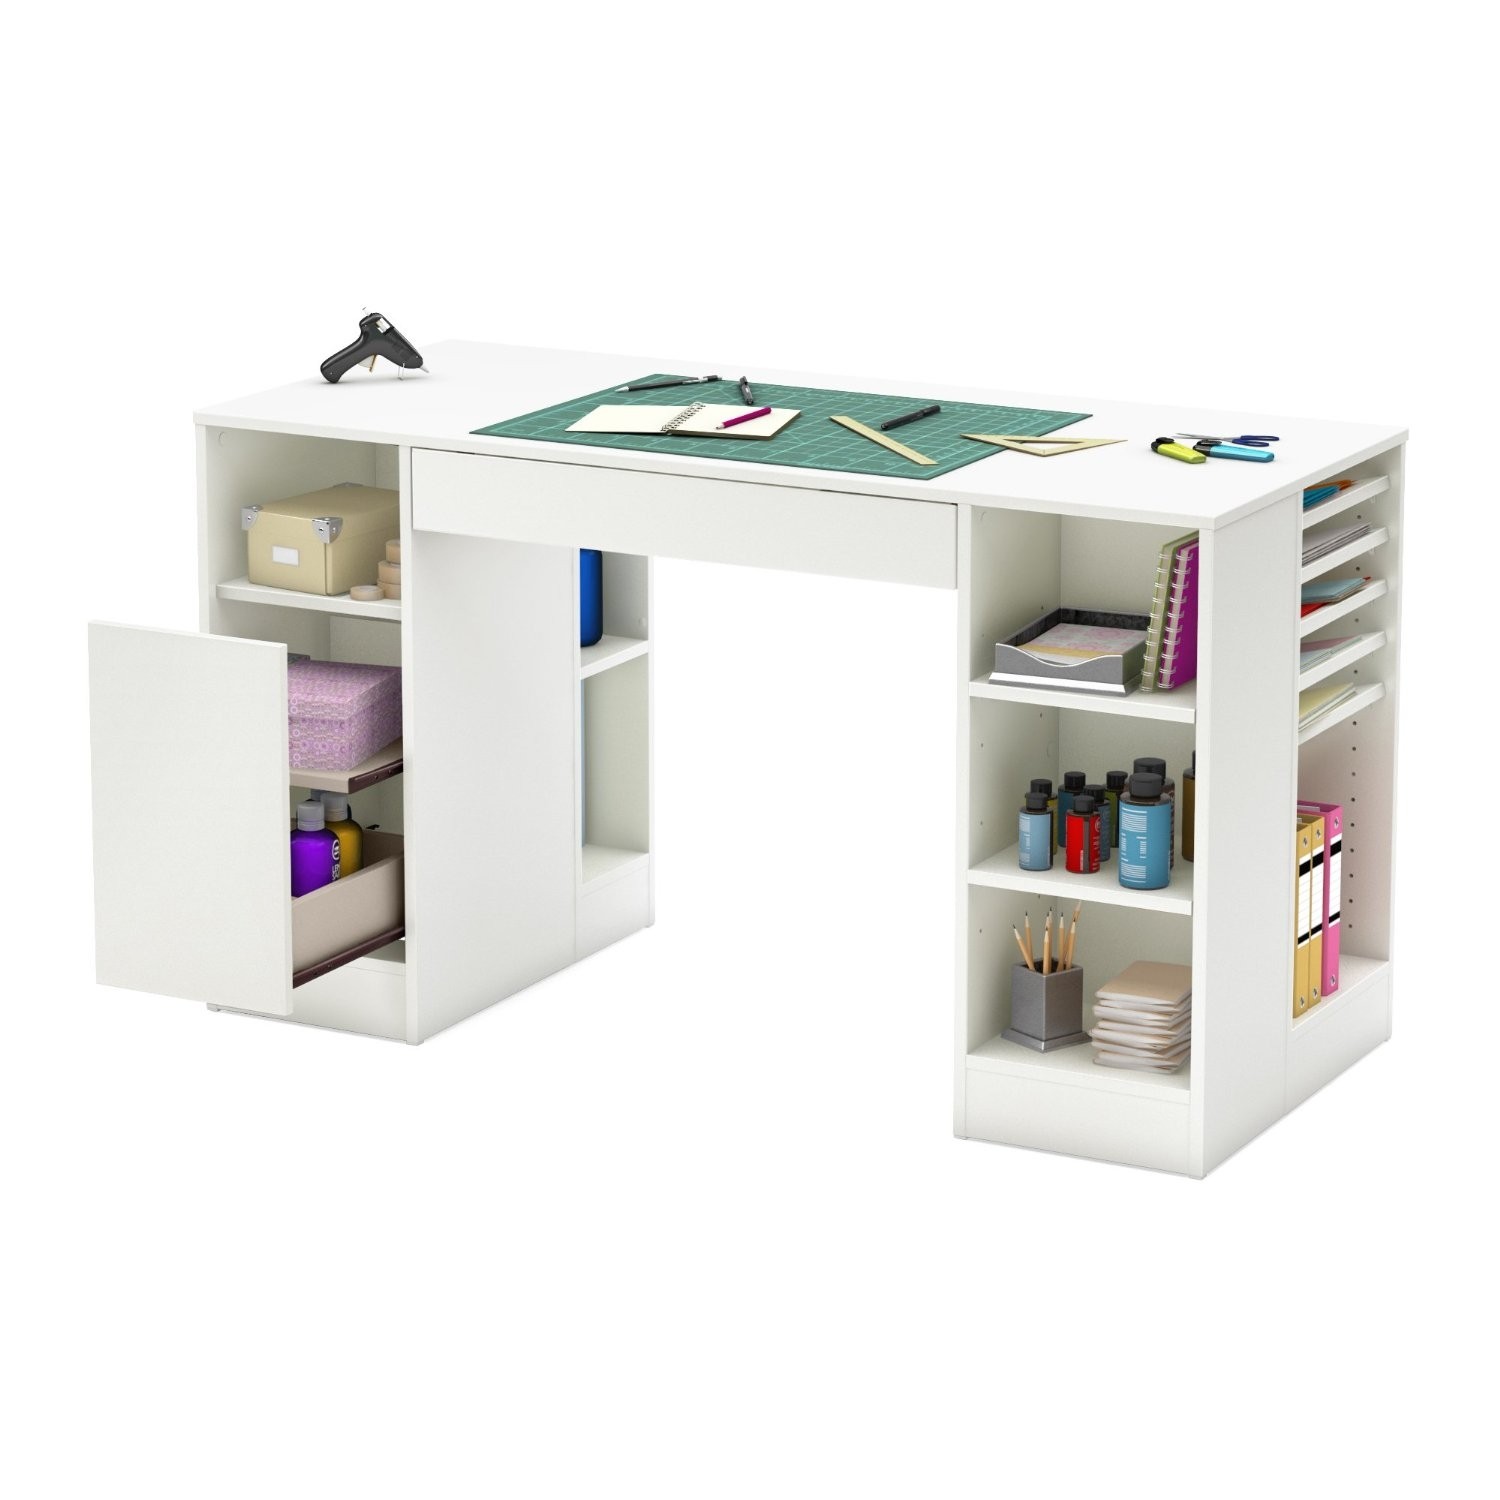 Creative craft table with storage and room organization